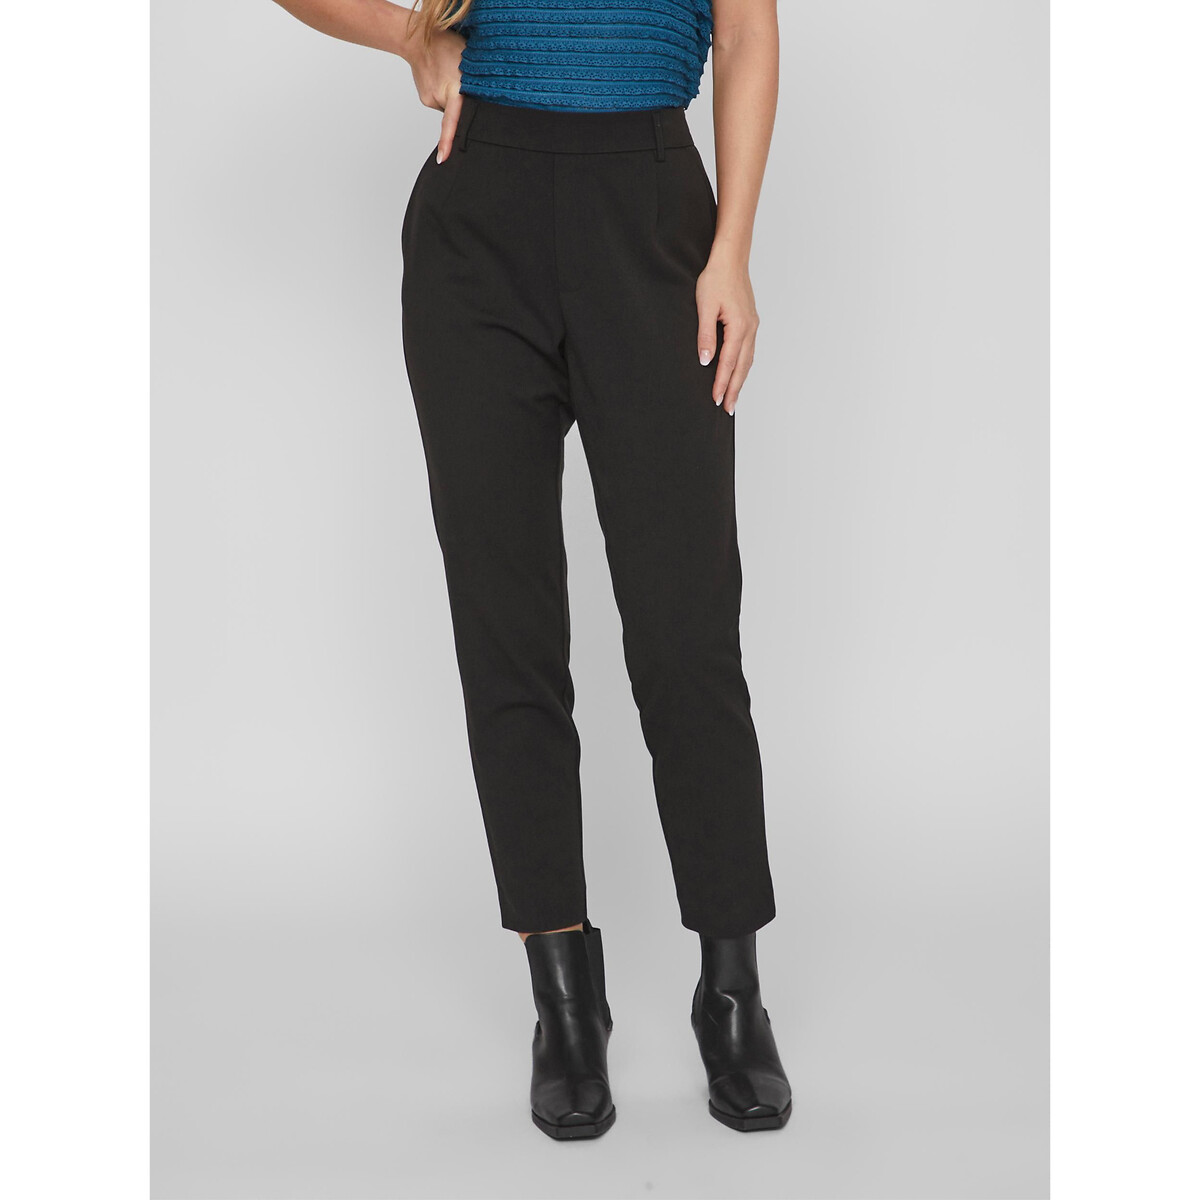 Image of Slim Fit Tailored Trousers with High Waist